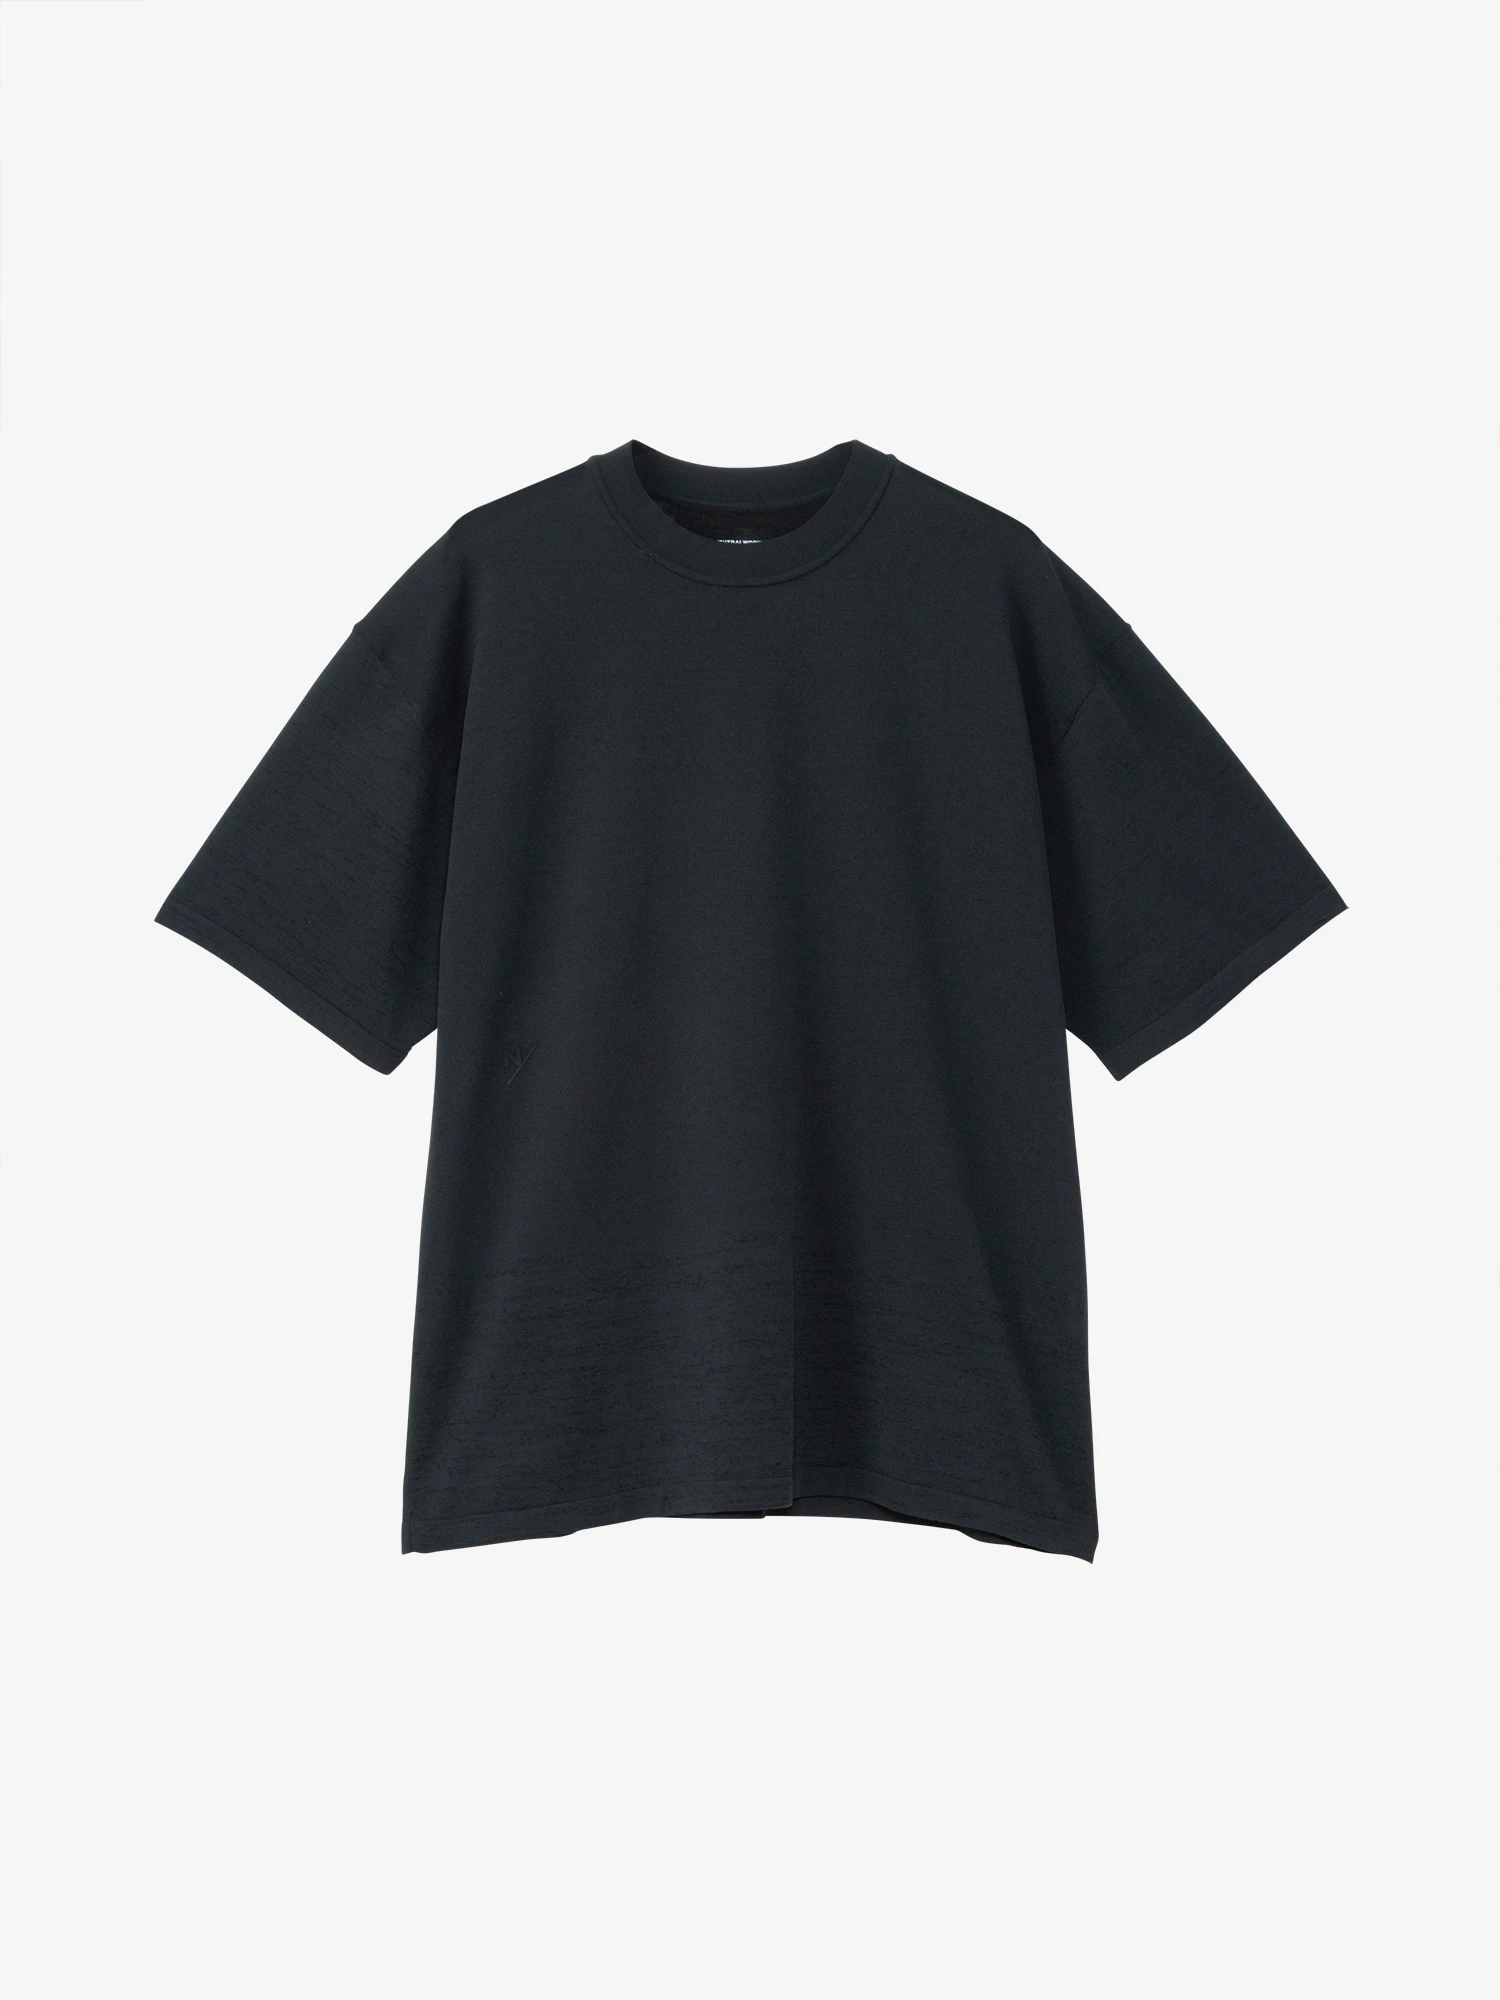 The "KOMERINA" short-sleeve crew knit, categorized under "MOVE." Boasting a relaxed box silhouette for ease of movement and comfort. Priced at 15,400 yen (tax included)